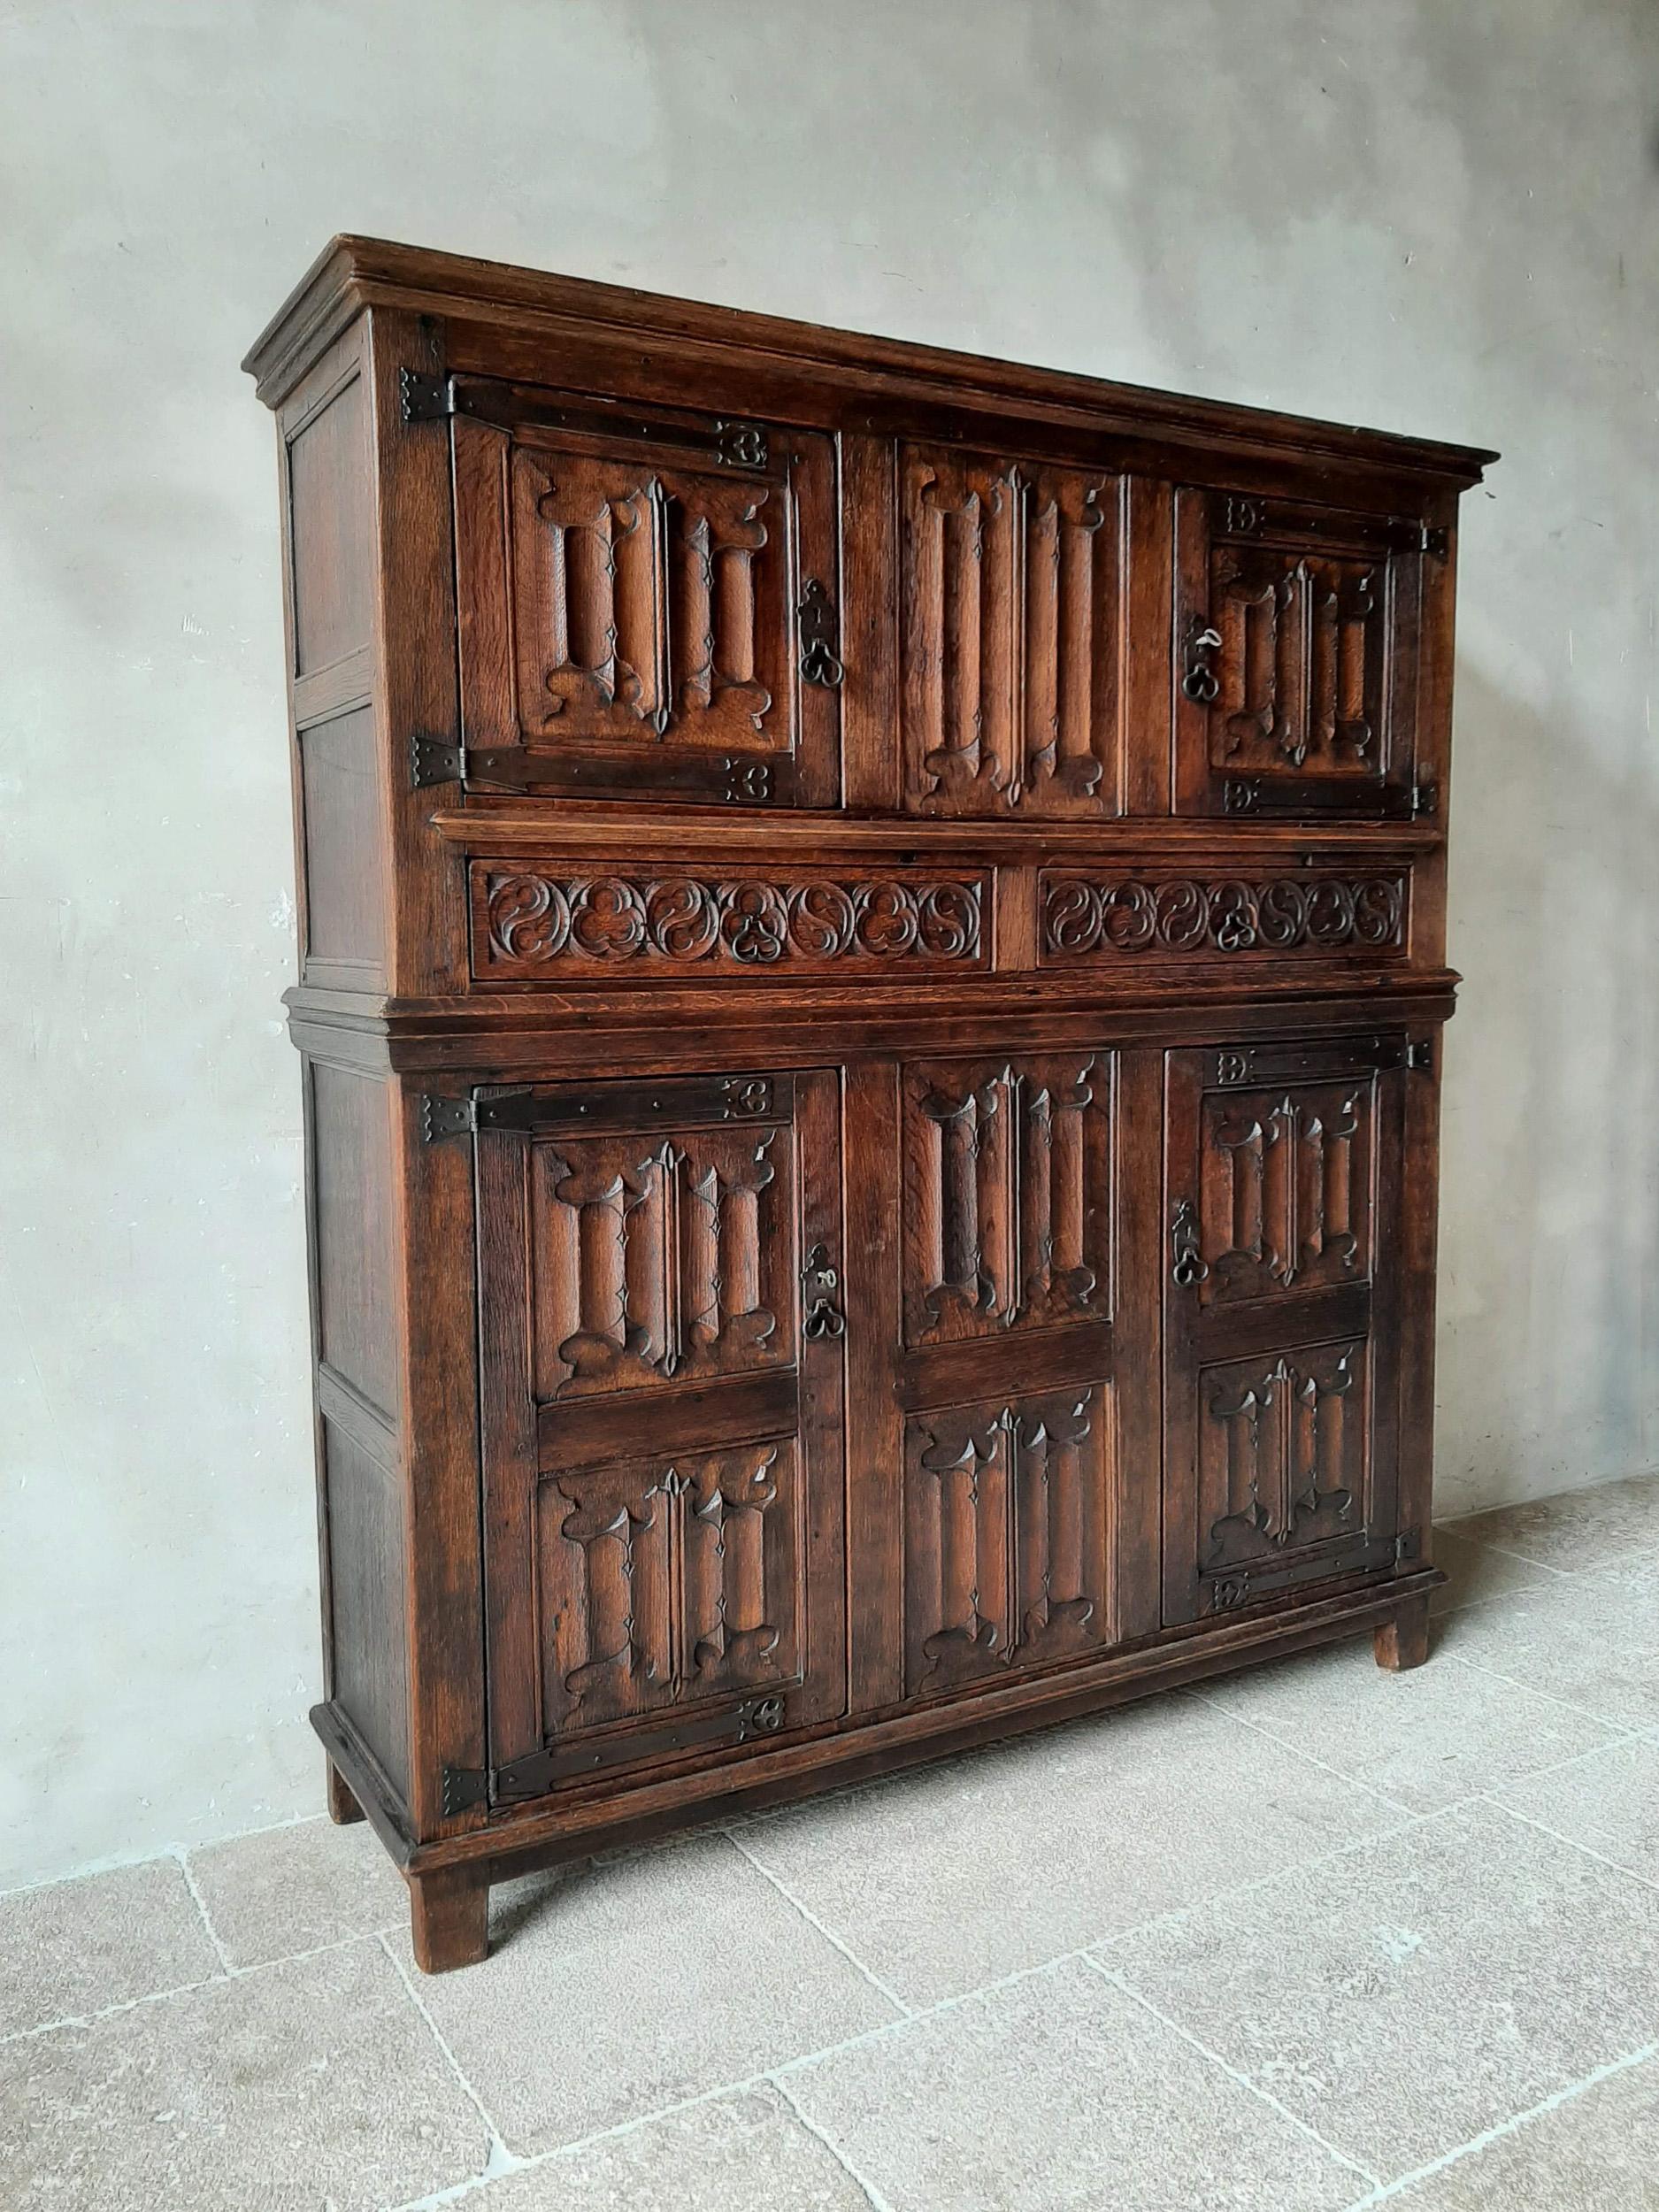 Hand-Carved Amazing Gothic Revival High Credenza with Hand Carved Church Windows Early 1900s